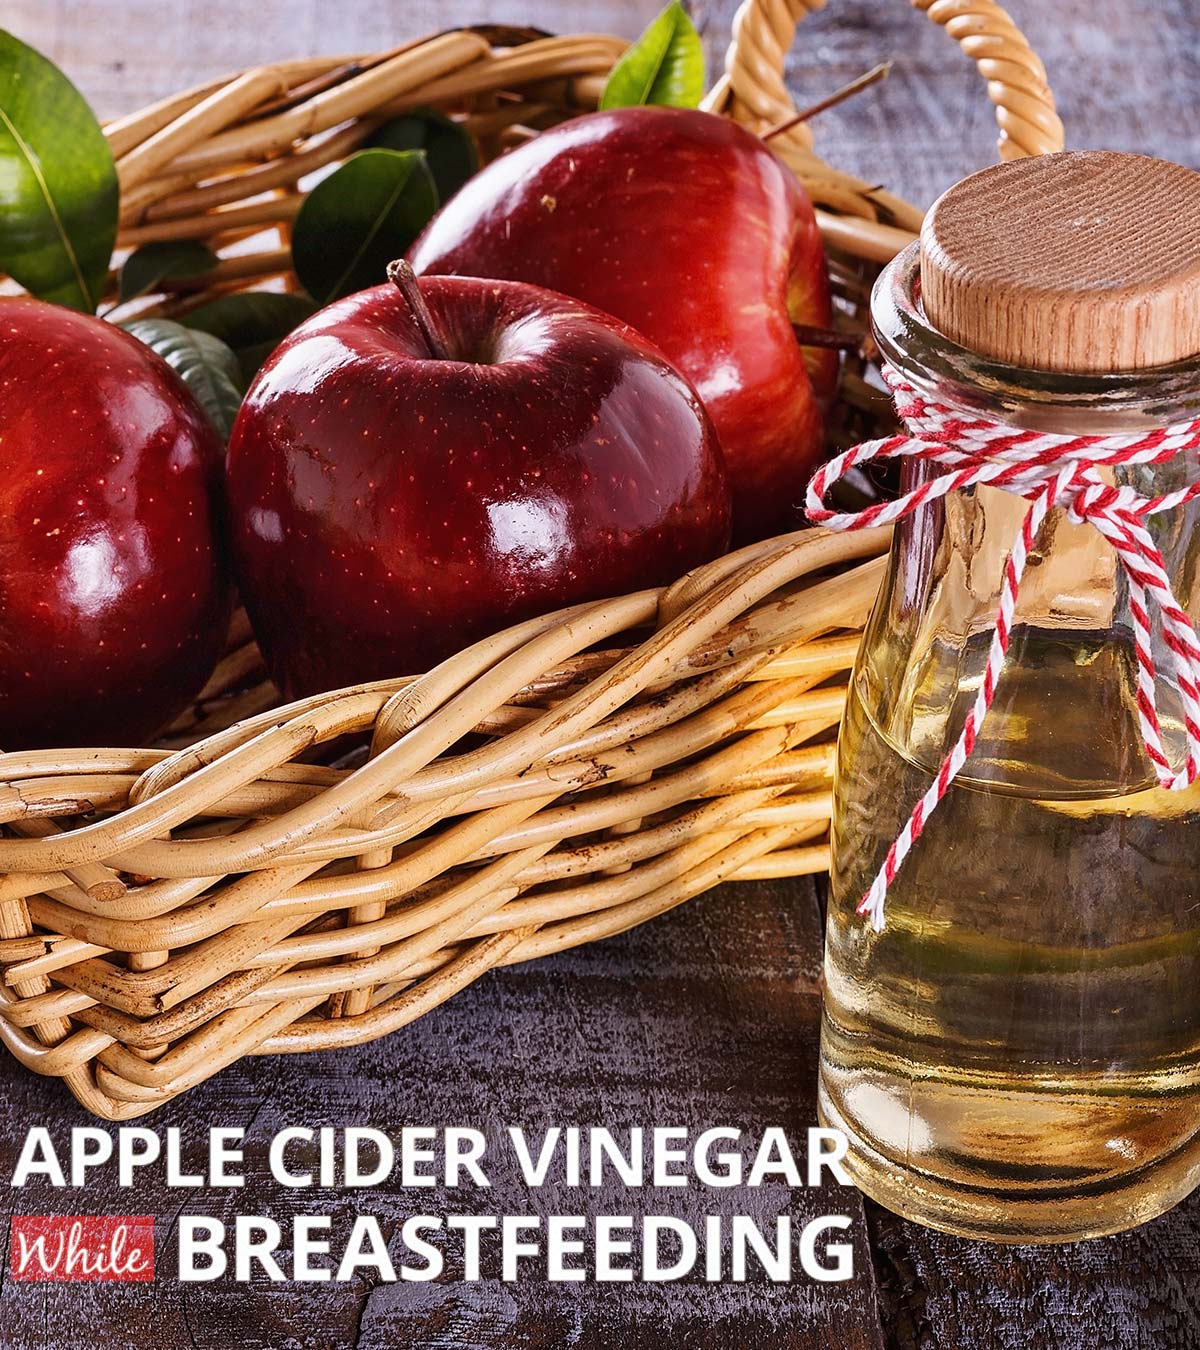 Is It Safe To Take Apple Cider Vinegar While Breastfeeding?